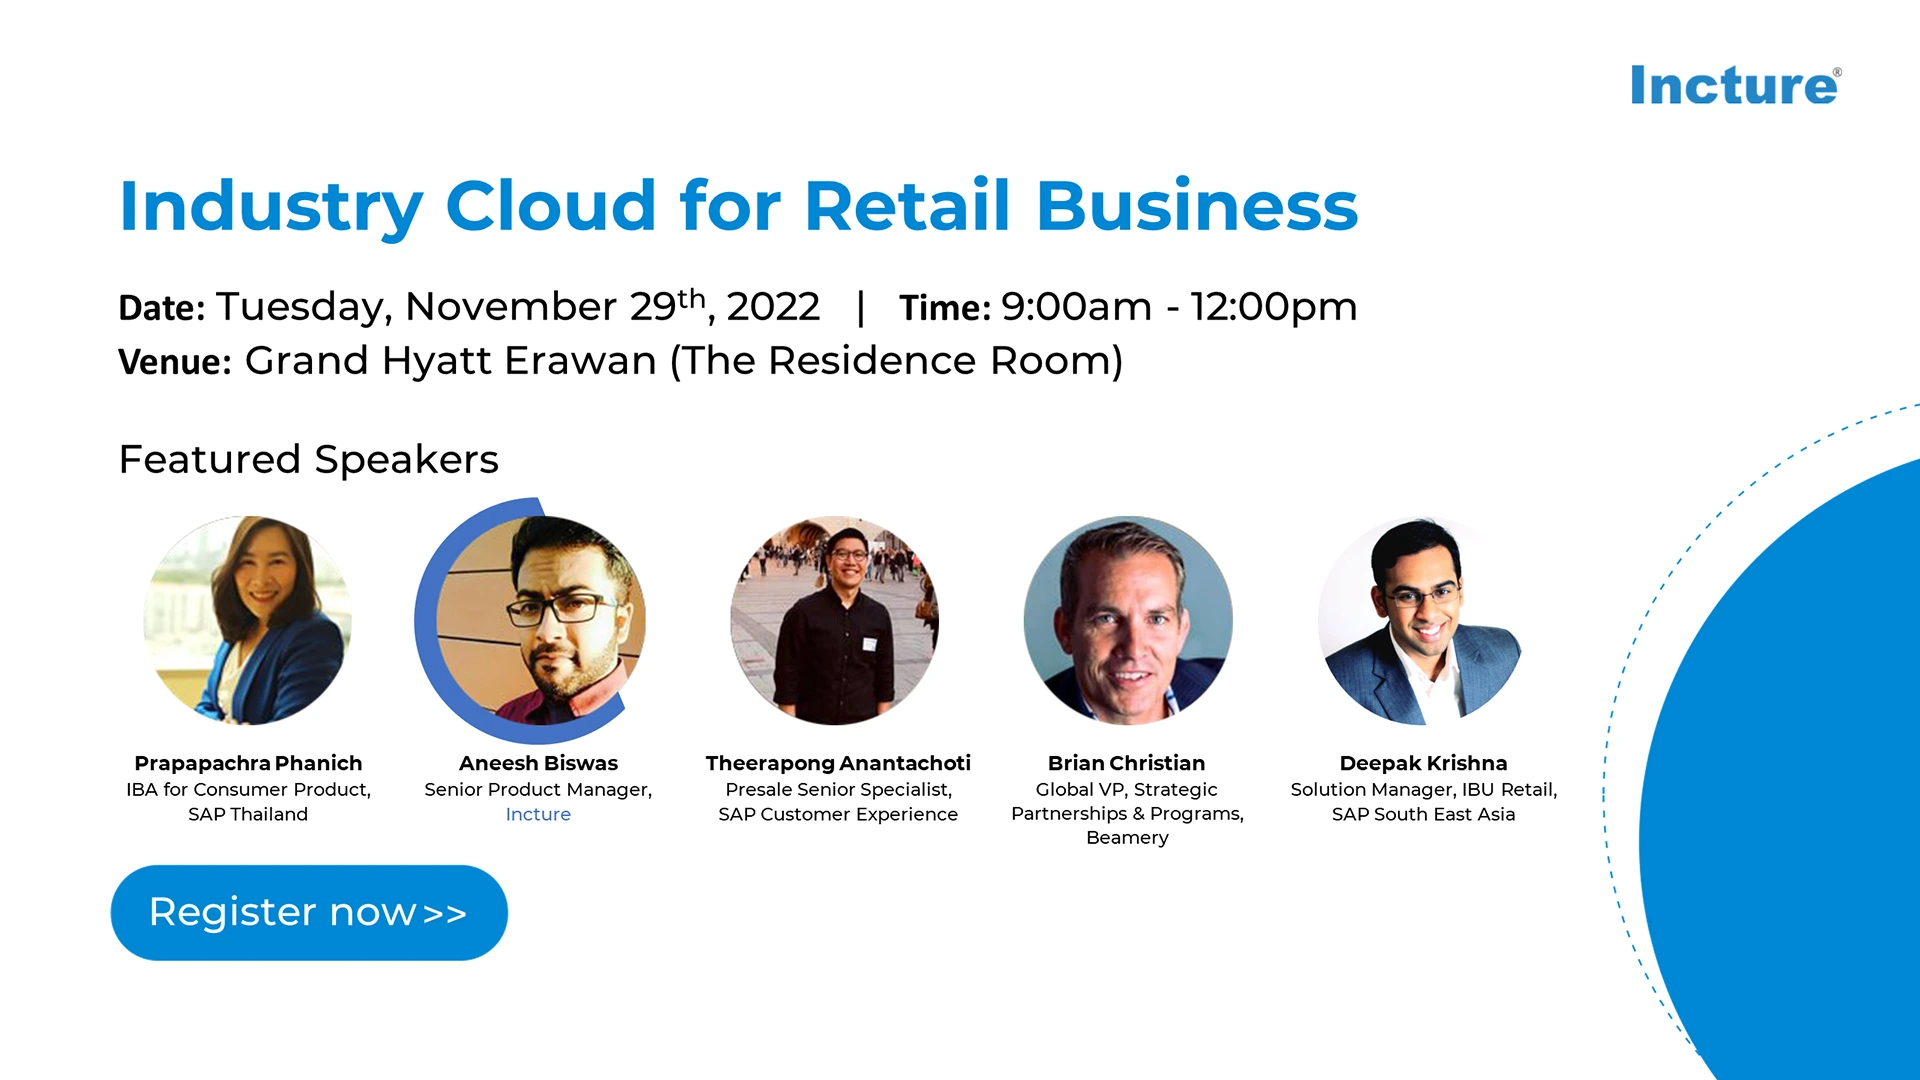 Industry Cloud for Retail Business